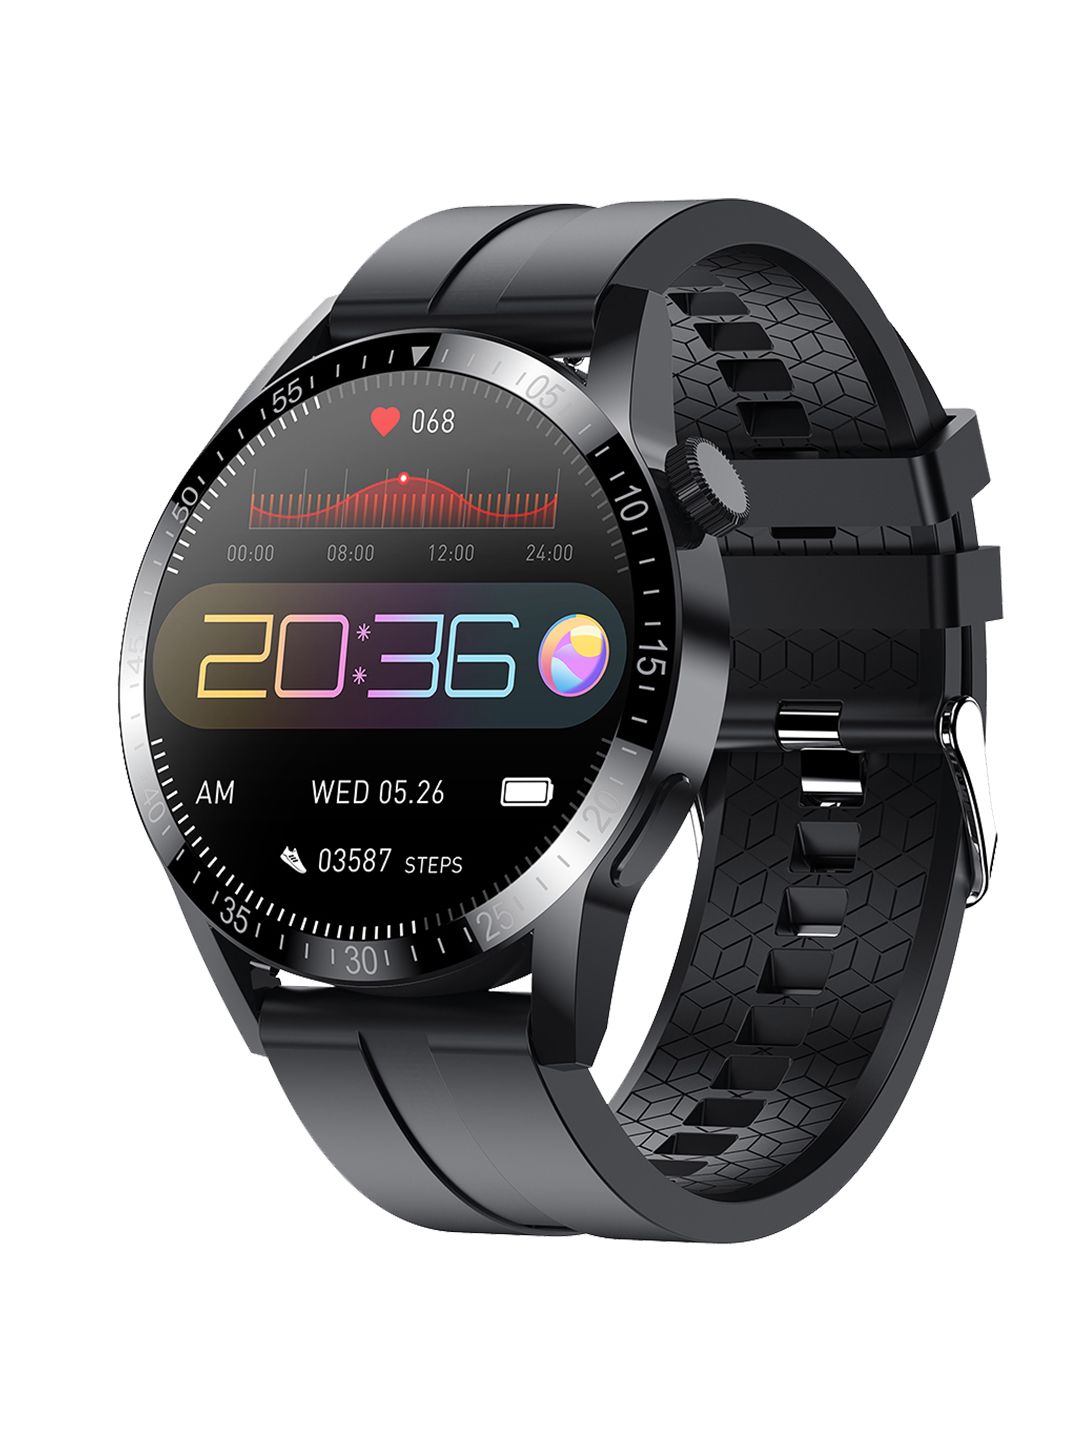 Fire-Boltt Talk Pro Smart Watch - Black 38BSWAAY-1 Price in India